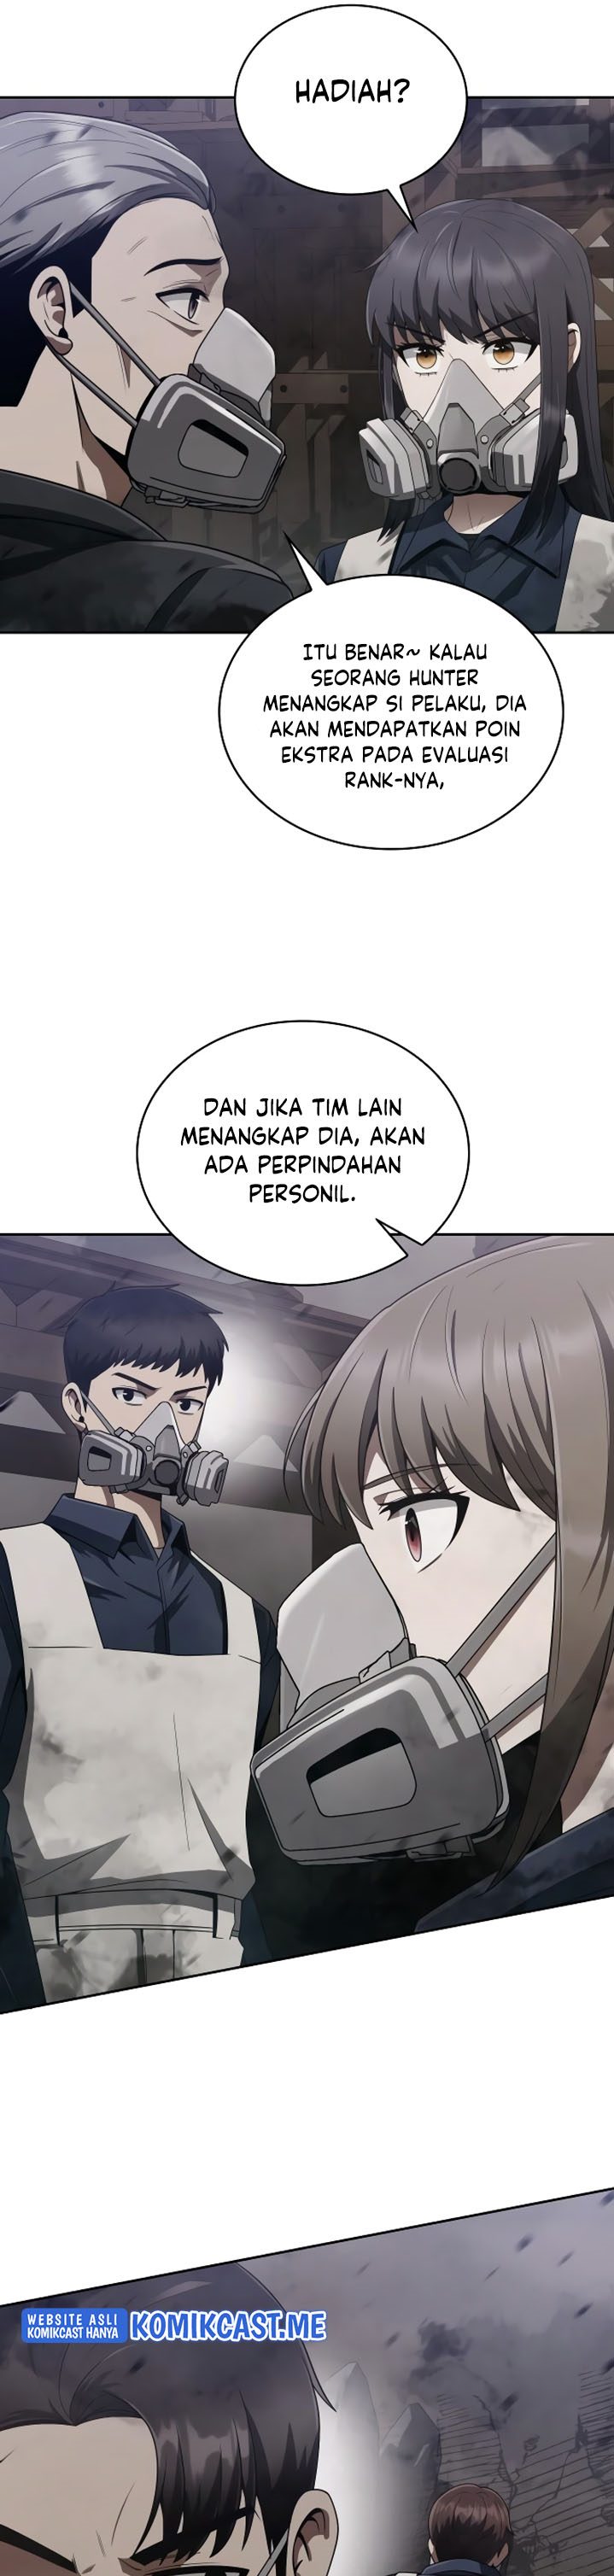 Dilarang COPAS - situs resmi www.mangacanblog.com - Komik clever cleaning life of the returned genius hunter 011 - chapter 11 12 Indonesia clever cleaning life of the returned genius hunter 011 - chapter 11 Terbaru 29|Baca Manga Komik Indonesia|Mangacan